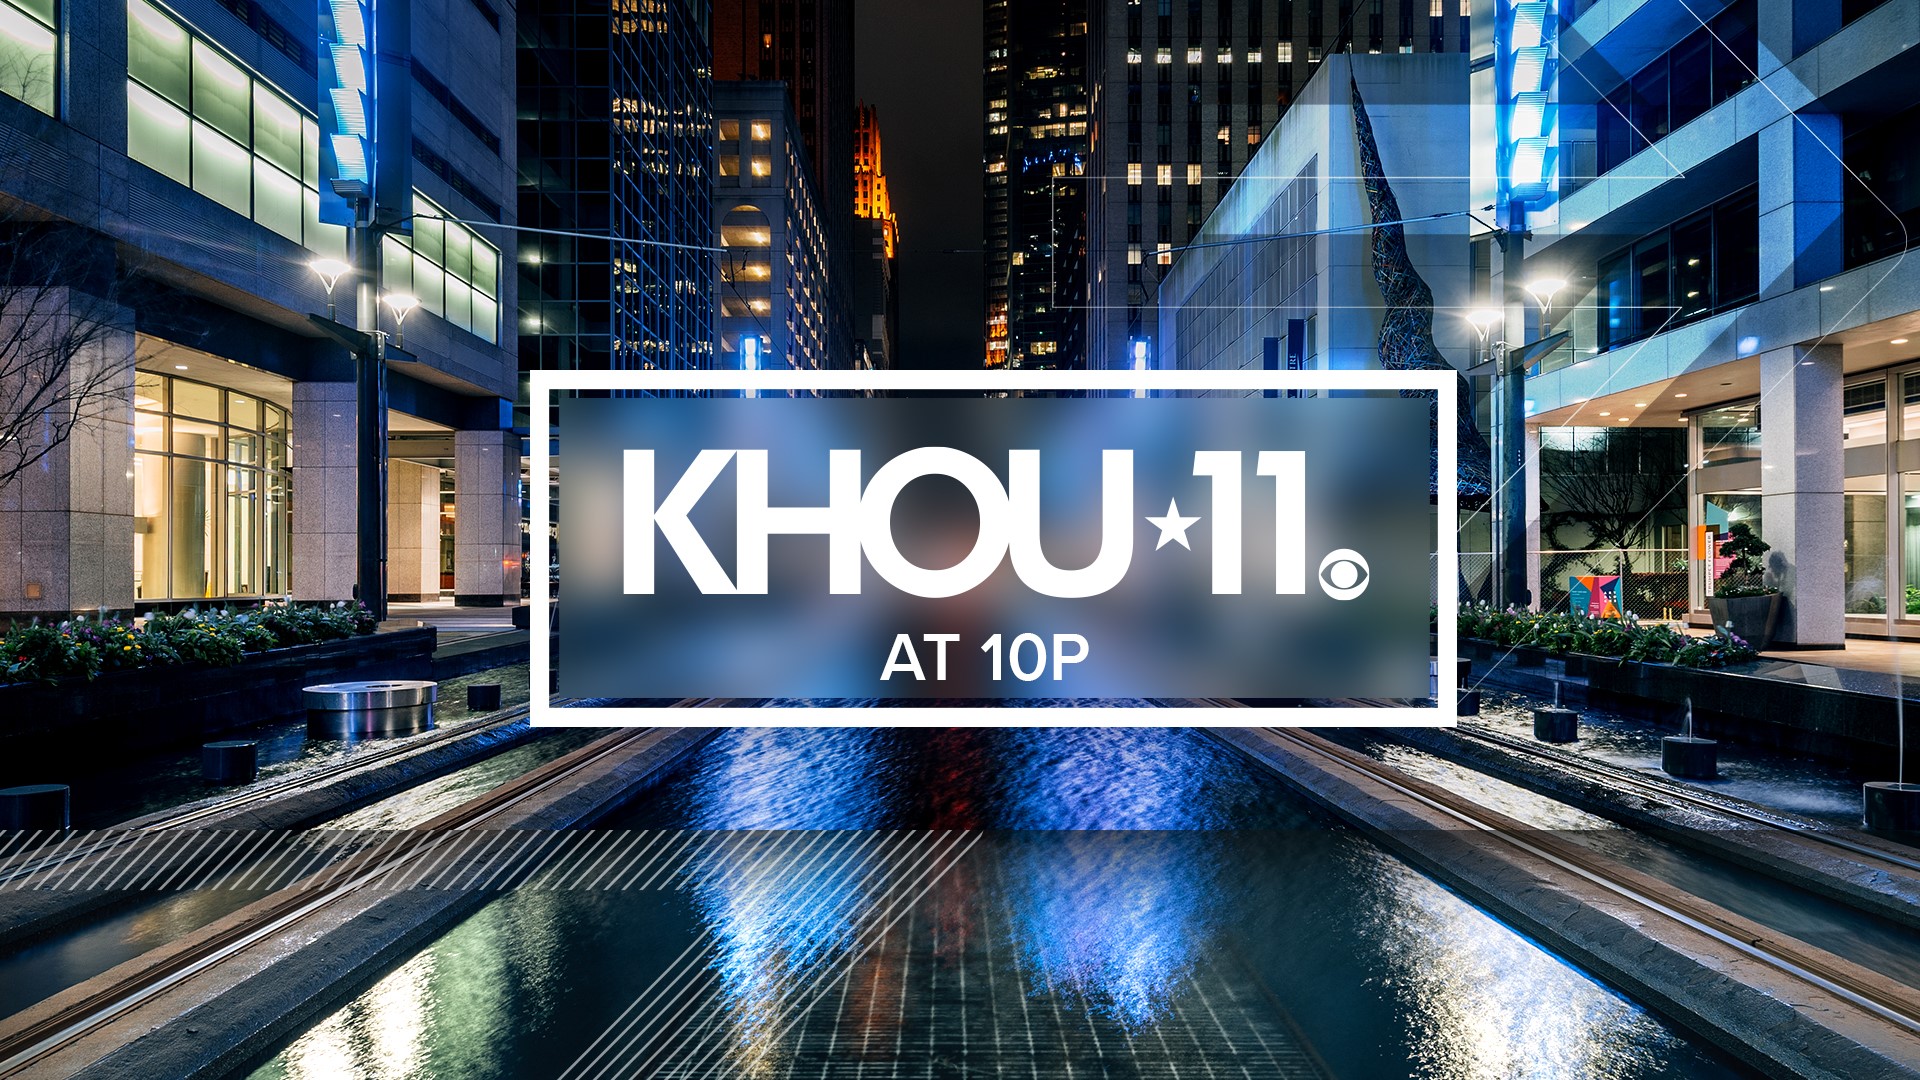 Thoughtful journalism from a news team you can trust. KHOU 11 News at 10pm has news, weather and critical updates.